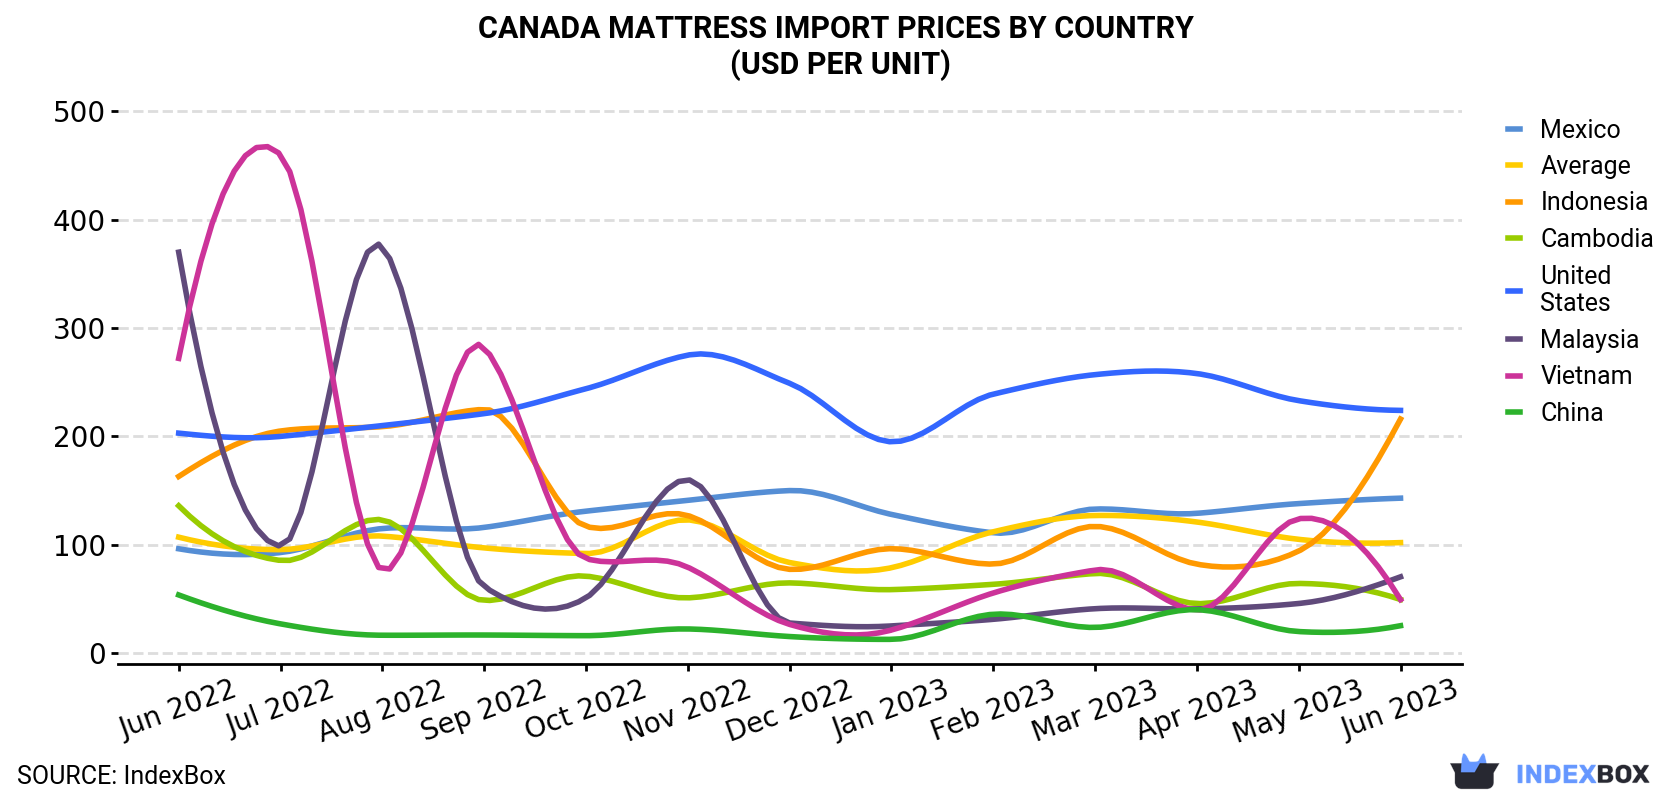 Canada Mattress Import Prices By Country (USD Per Unit)